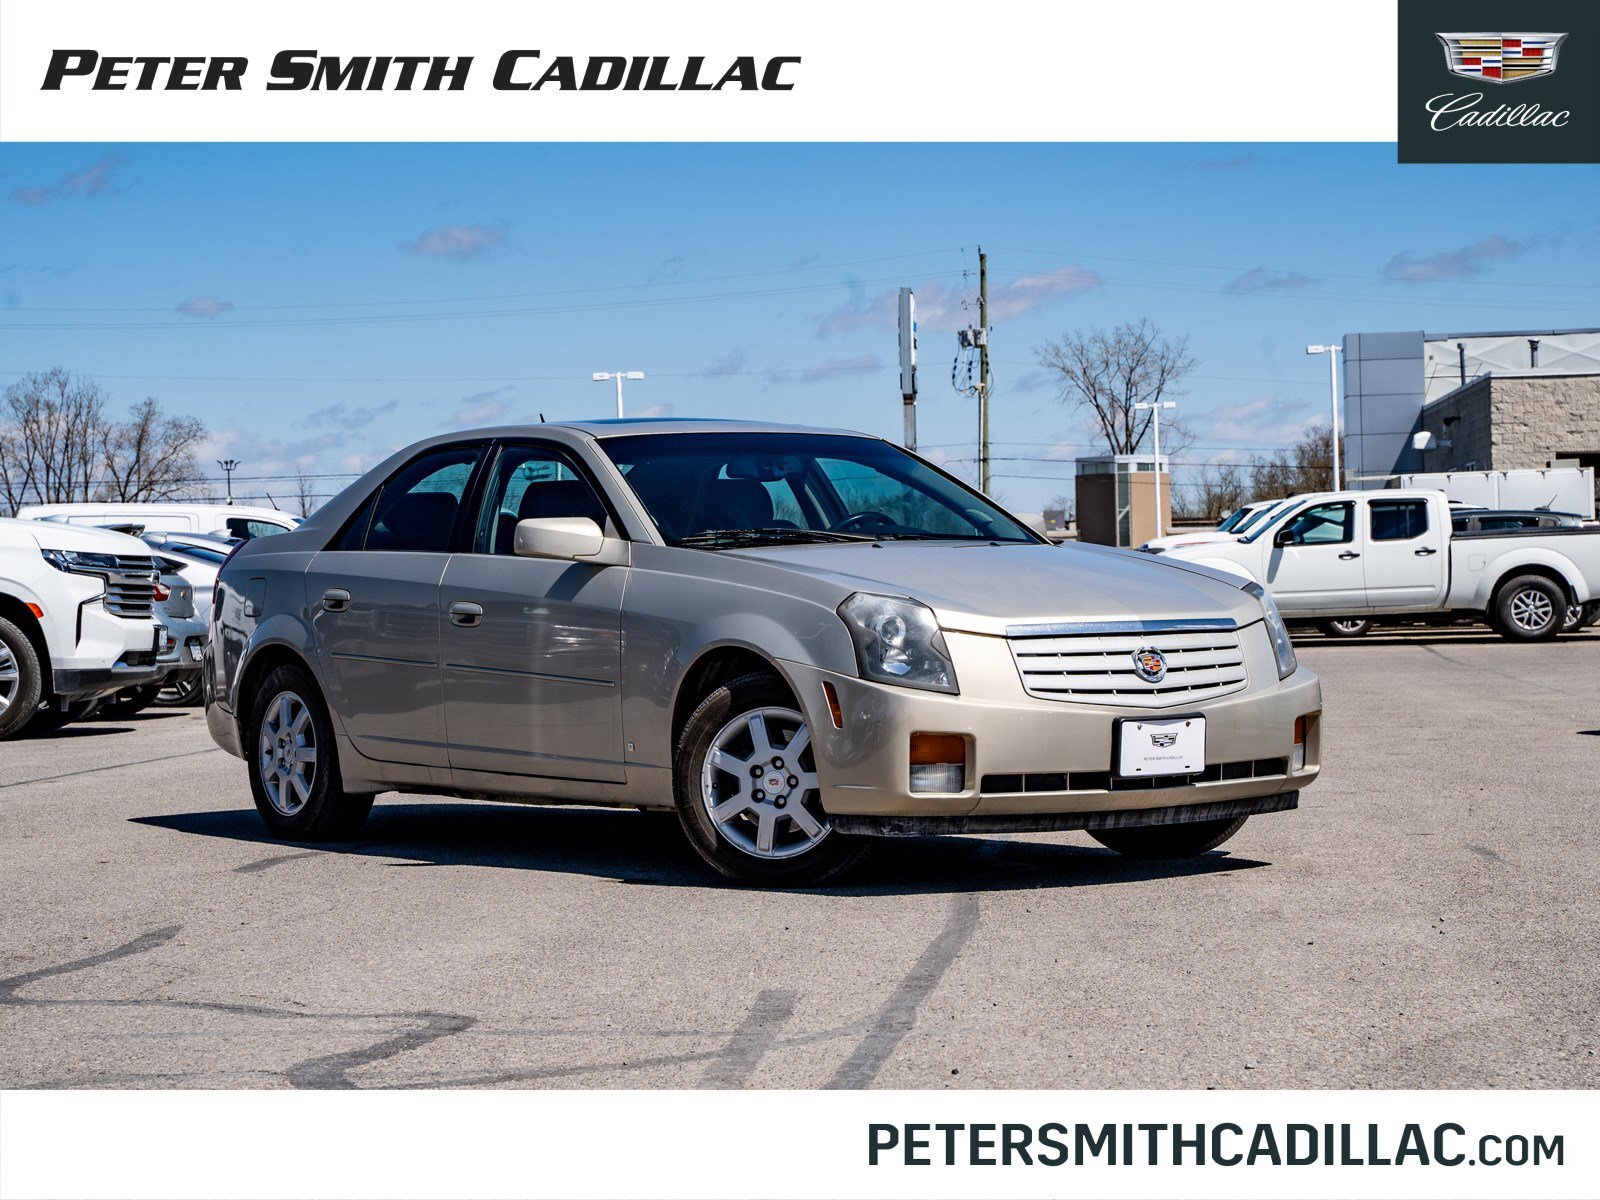 2007 Cadillac CTS BASE - 2.8L DOHC V6 | Sunroof | Heated Front Seats